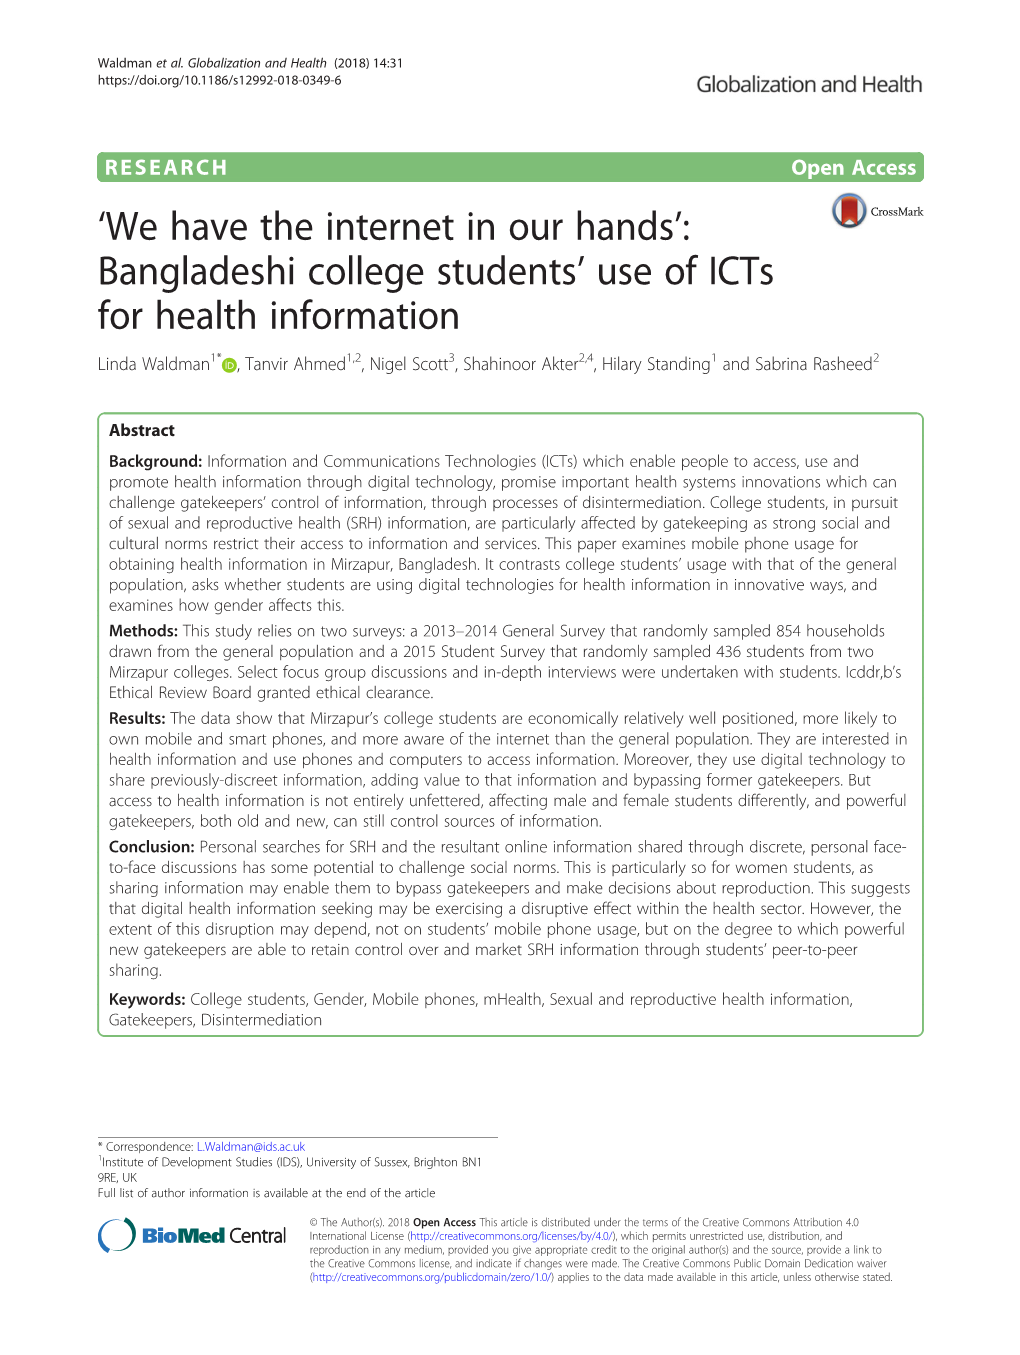 Bangladeshi College Students' Use of Icts for Health Information